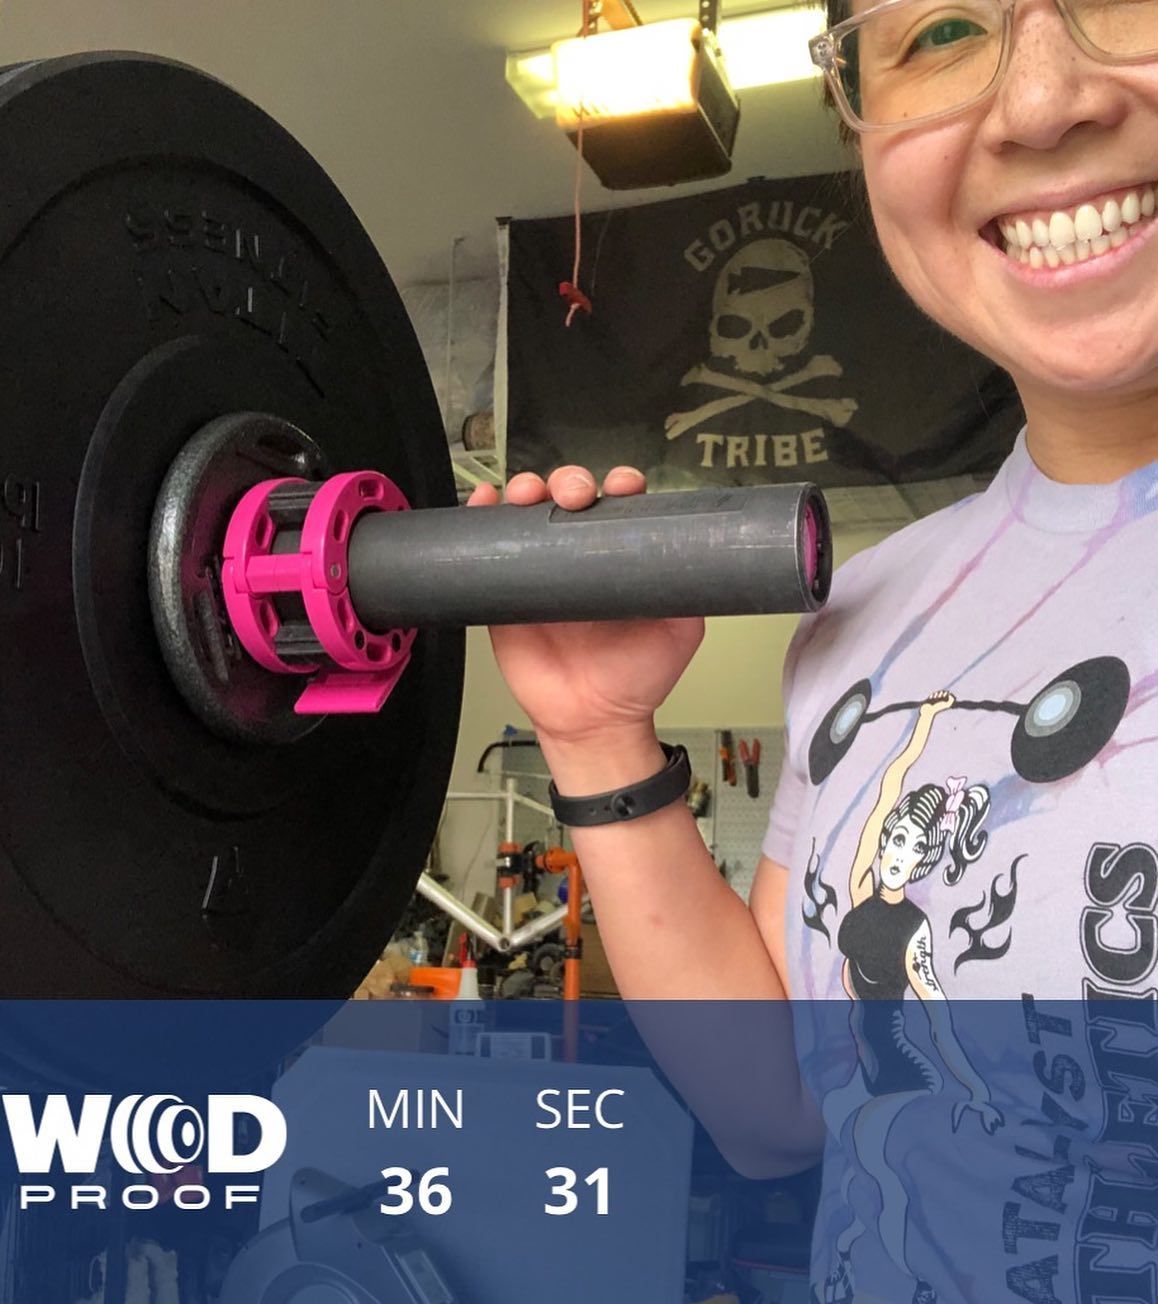 My right arse was finally feeling normal-ish on Thursday, so I did this workout that involved this thing called a “barbell” 🤪 Working (slowly) back to some weights. Also, showing off my @goruck Tribe flag!#crammingforcrossfit #frontsquats #wodproof #garagegym #baseperformance #michelobultra #teamultra #catalystathletics [instagram]